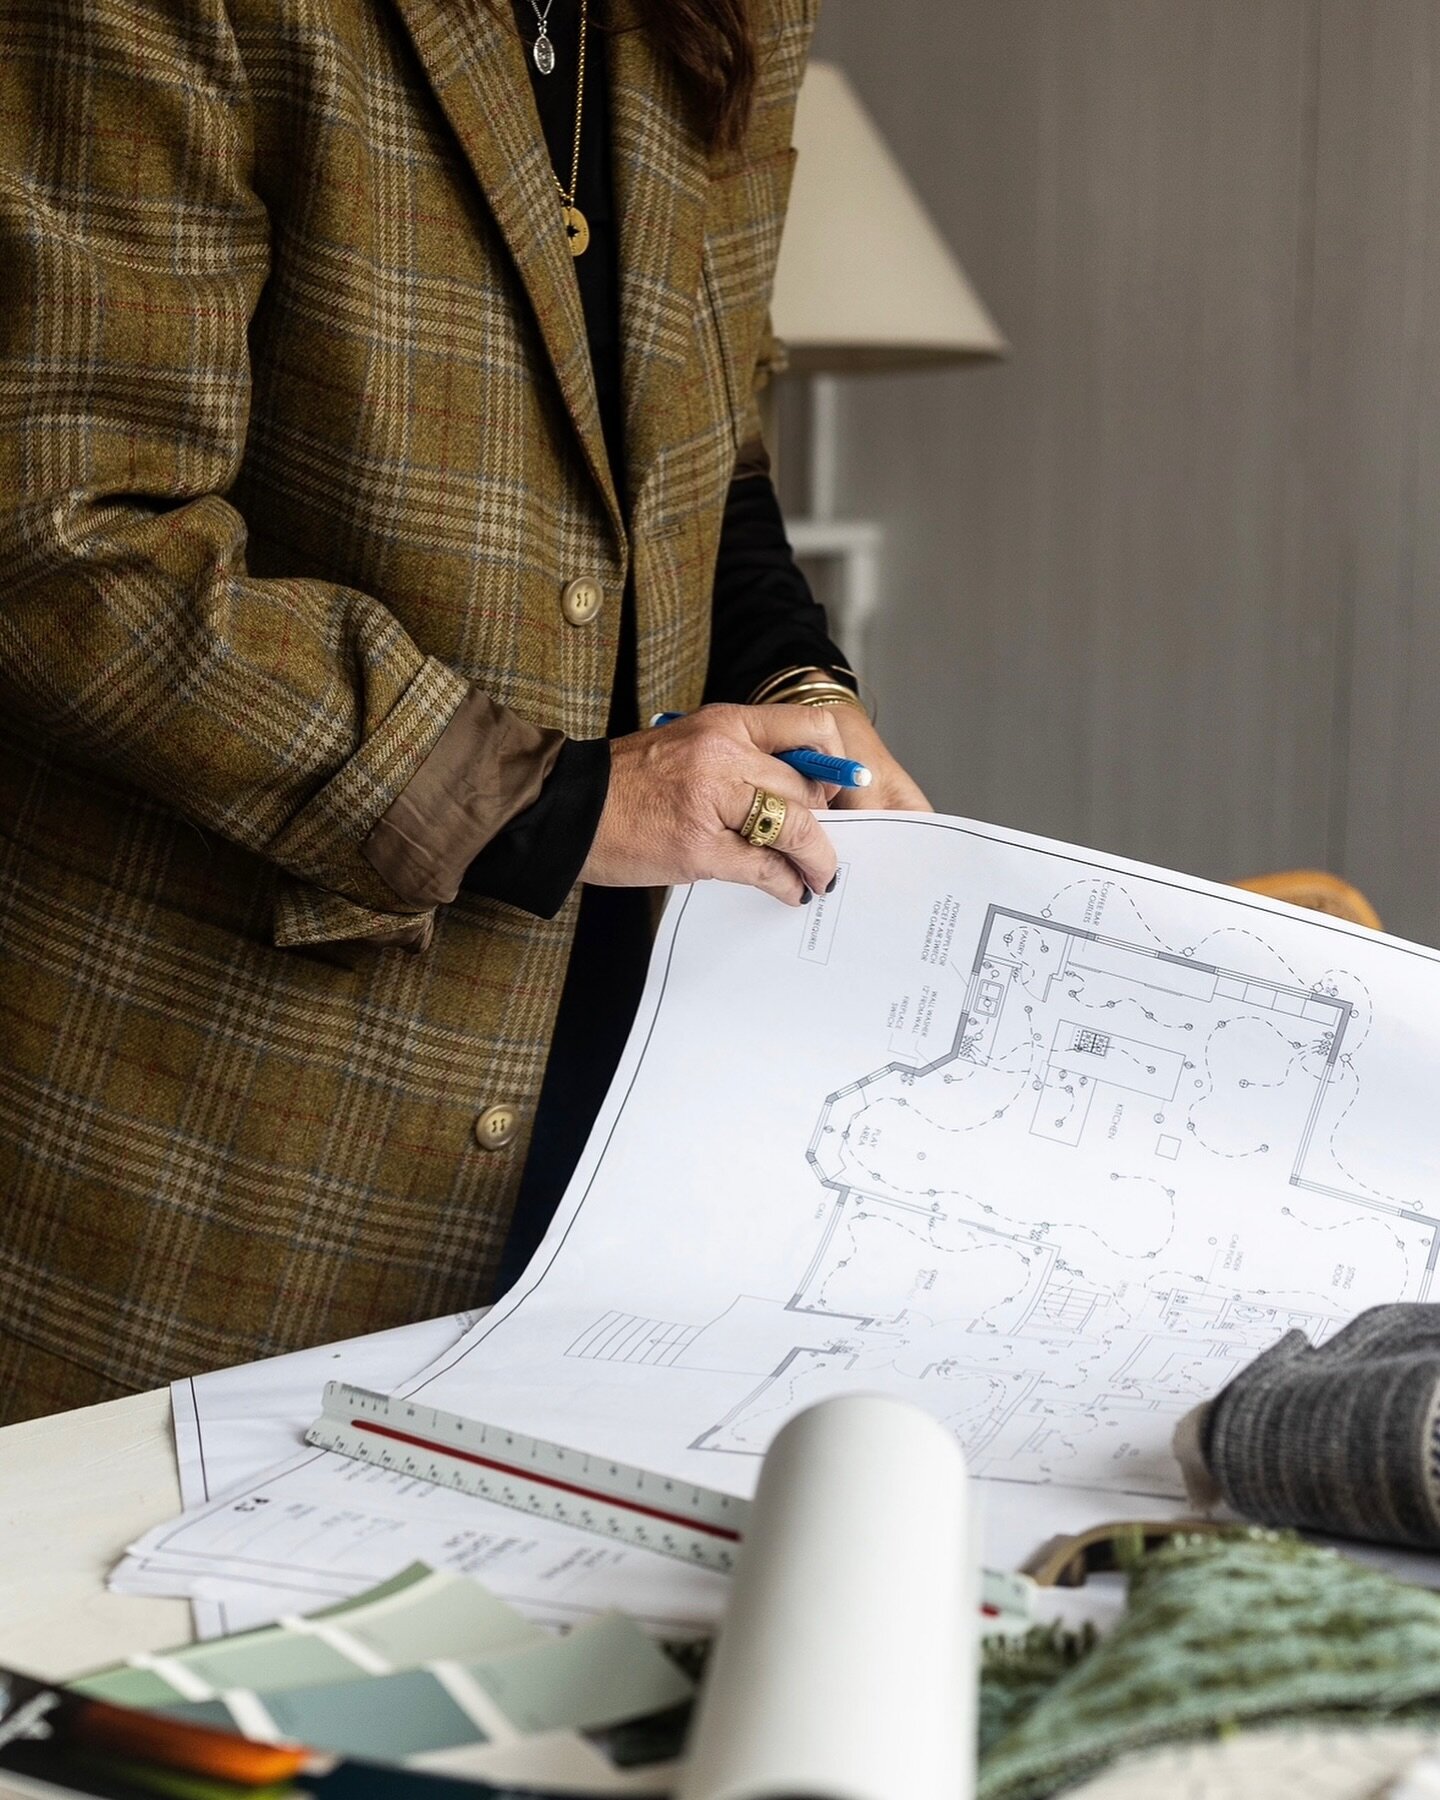 Planning a renovation takes a long time. There is so much to think about. First off is deciding on the space planning. How do you want to use the space? This can take some planning as there are always different ways to use the space. 

Once the space